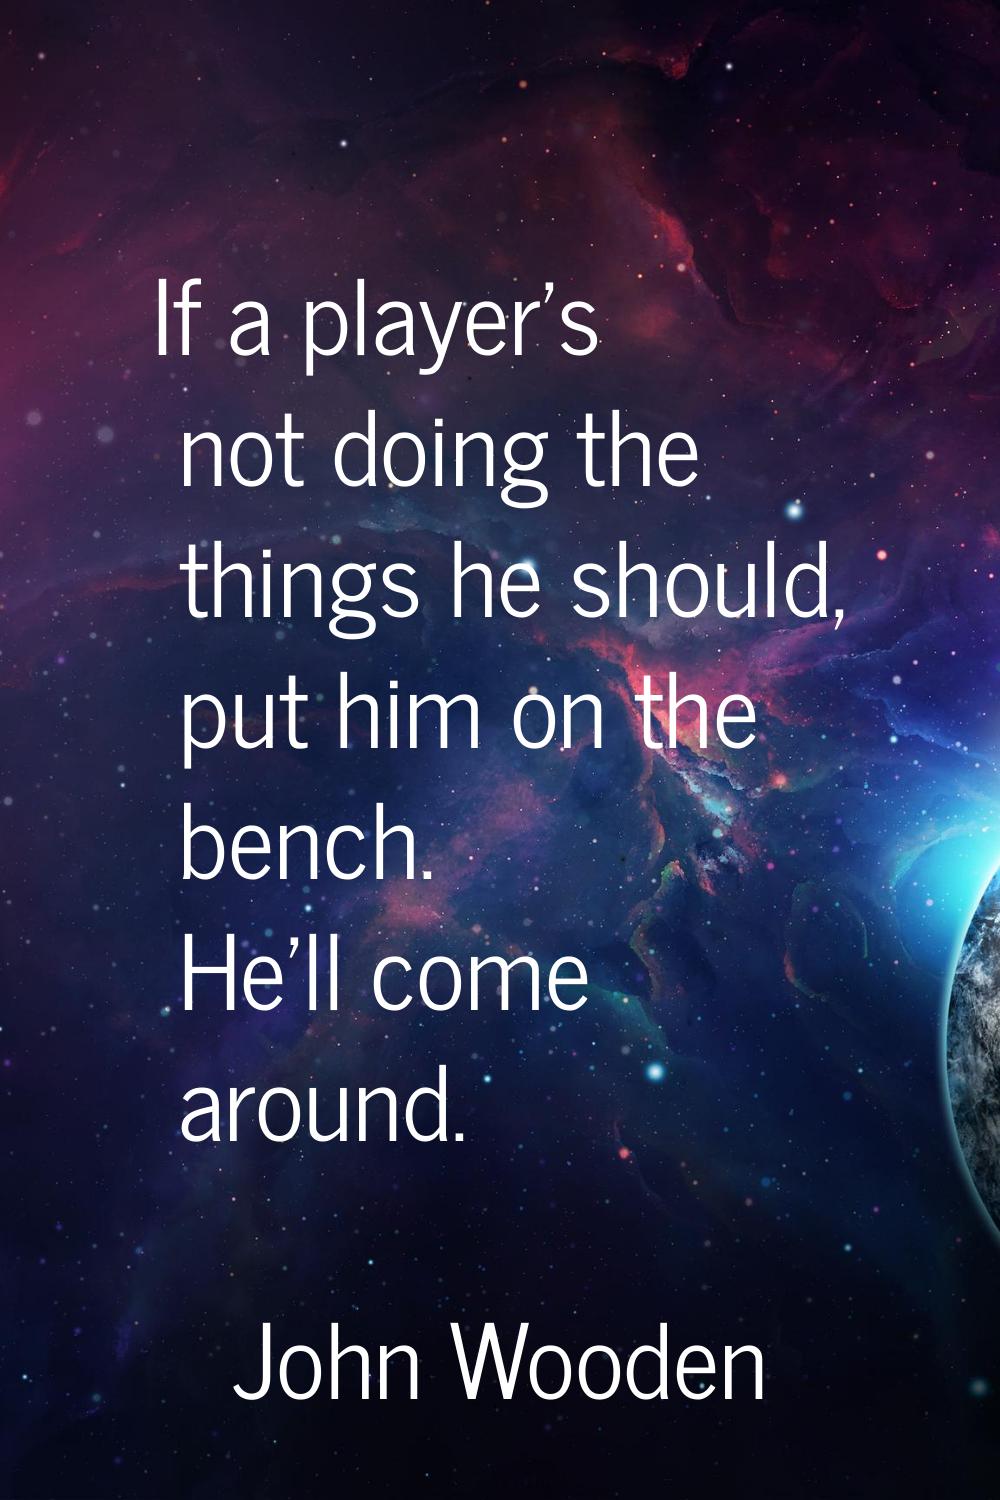 If a player's not doing the things he should, put him on the bench. He'll come around.